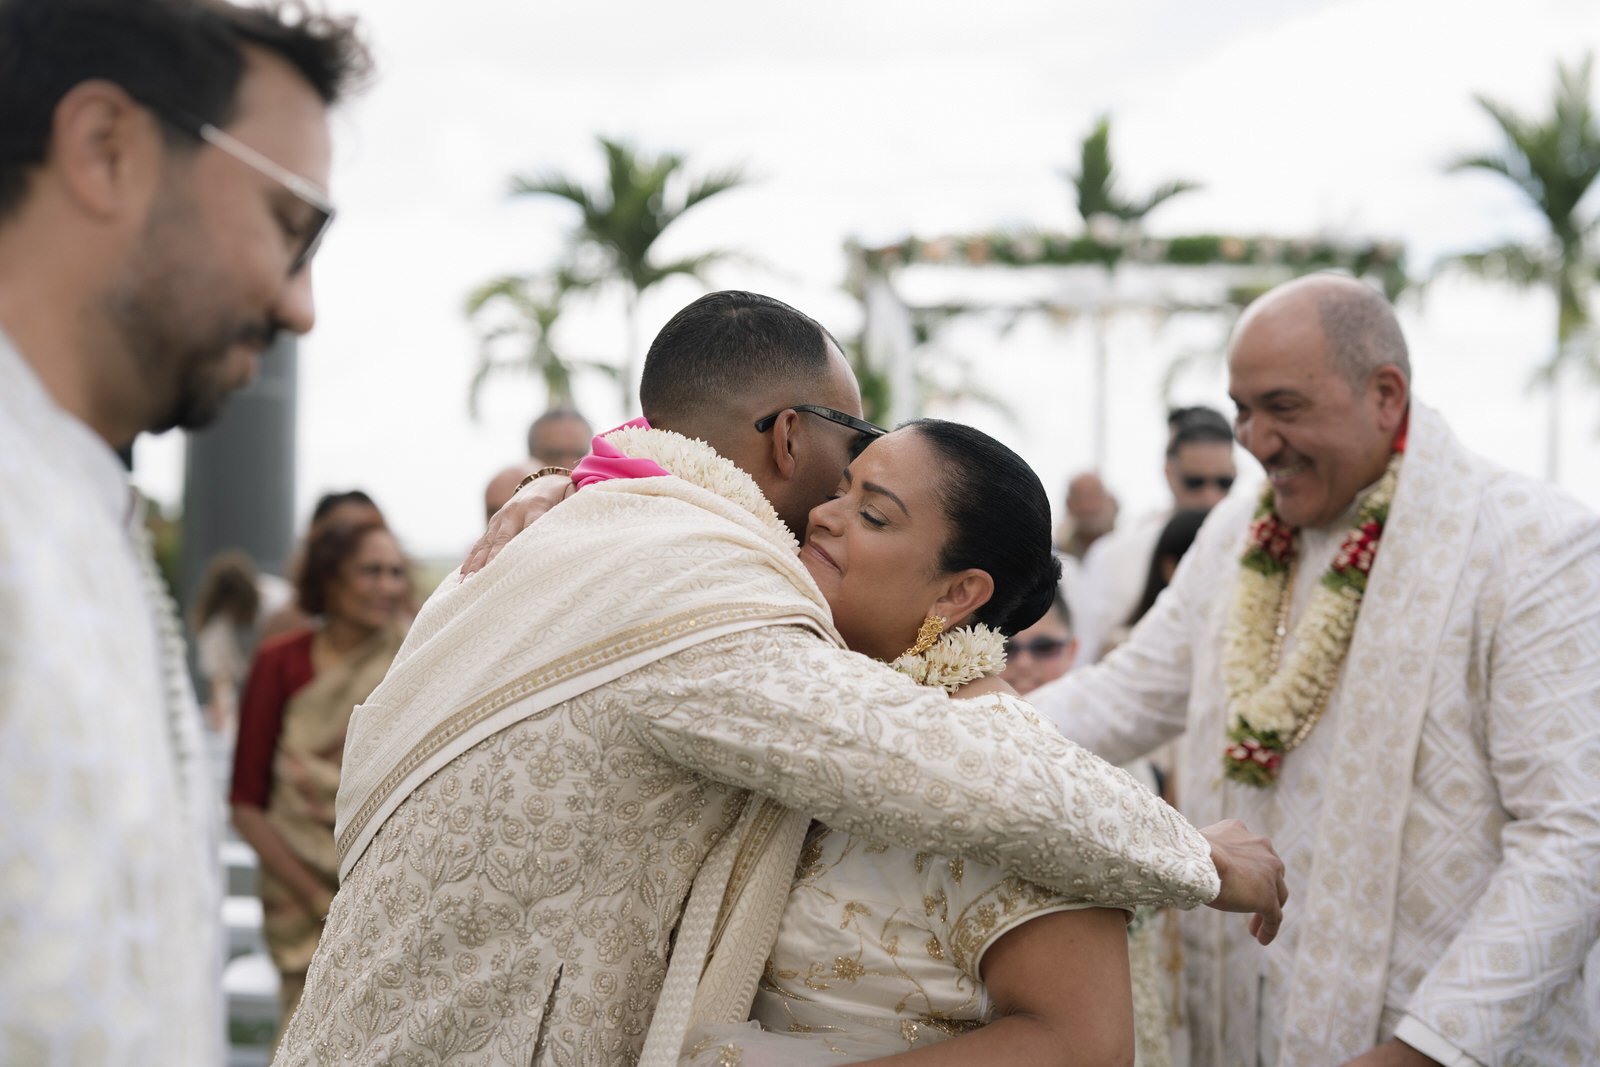 Luxury Indian Wedding in Miami Florida - Indian wedding photographer miami florida - michelle gonzalez photography - loews hotel in coral gables wedding-81.jpg